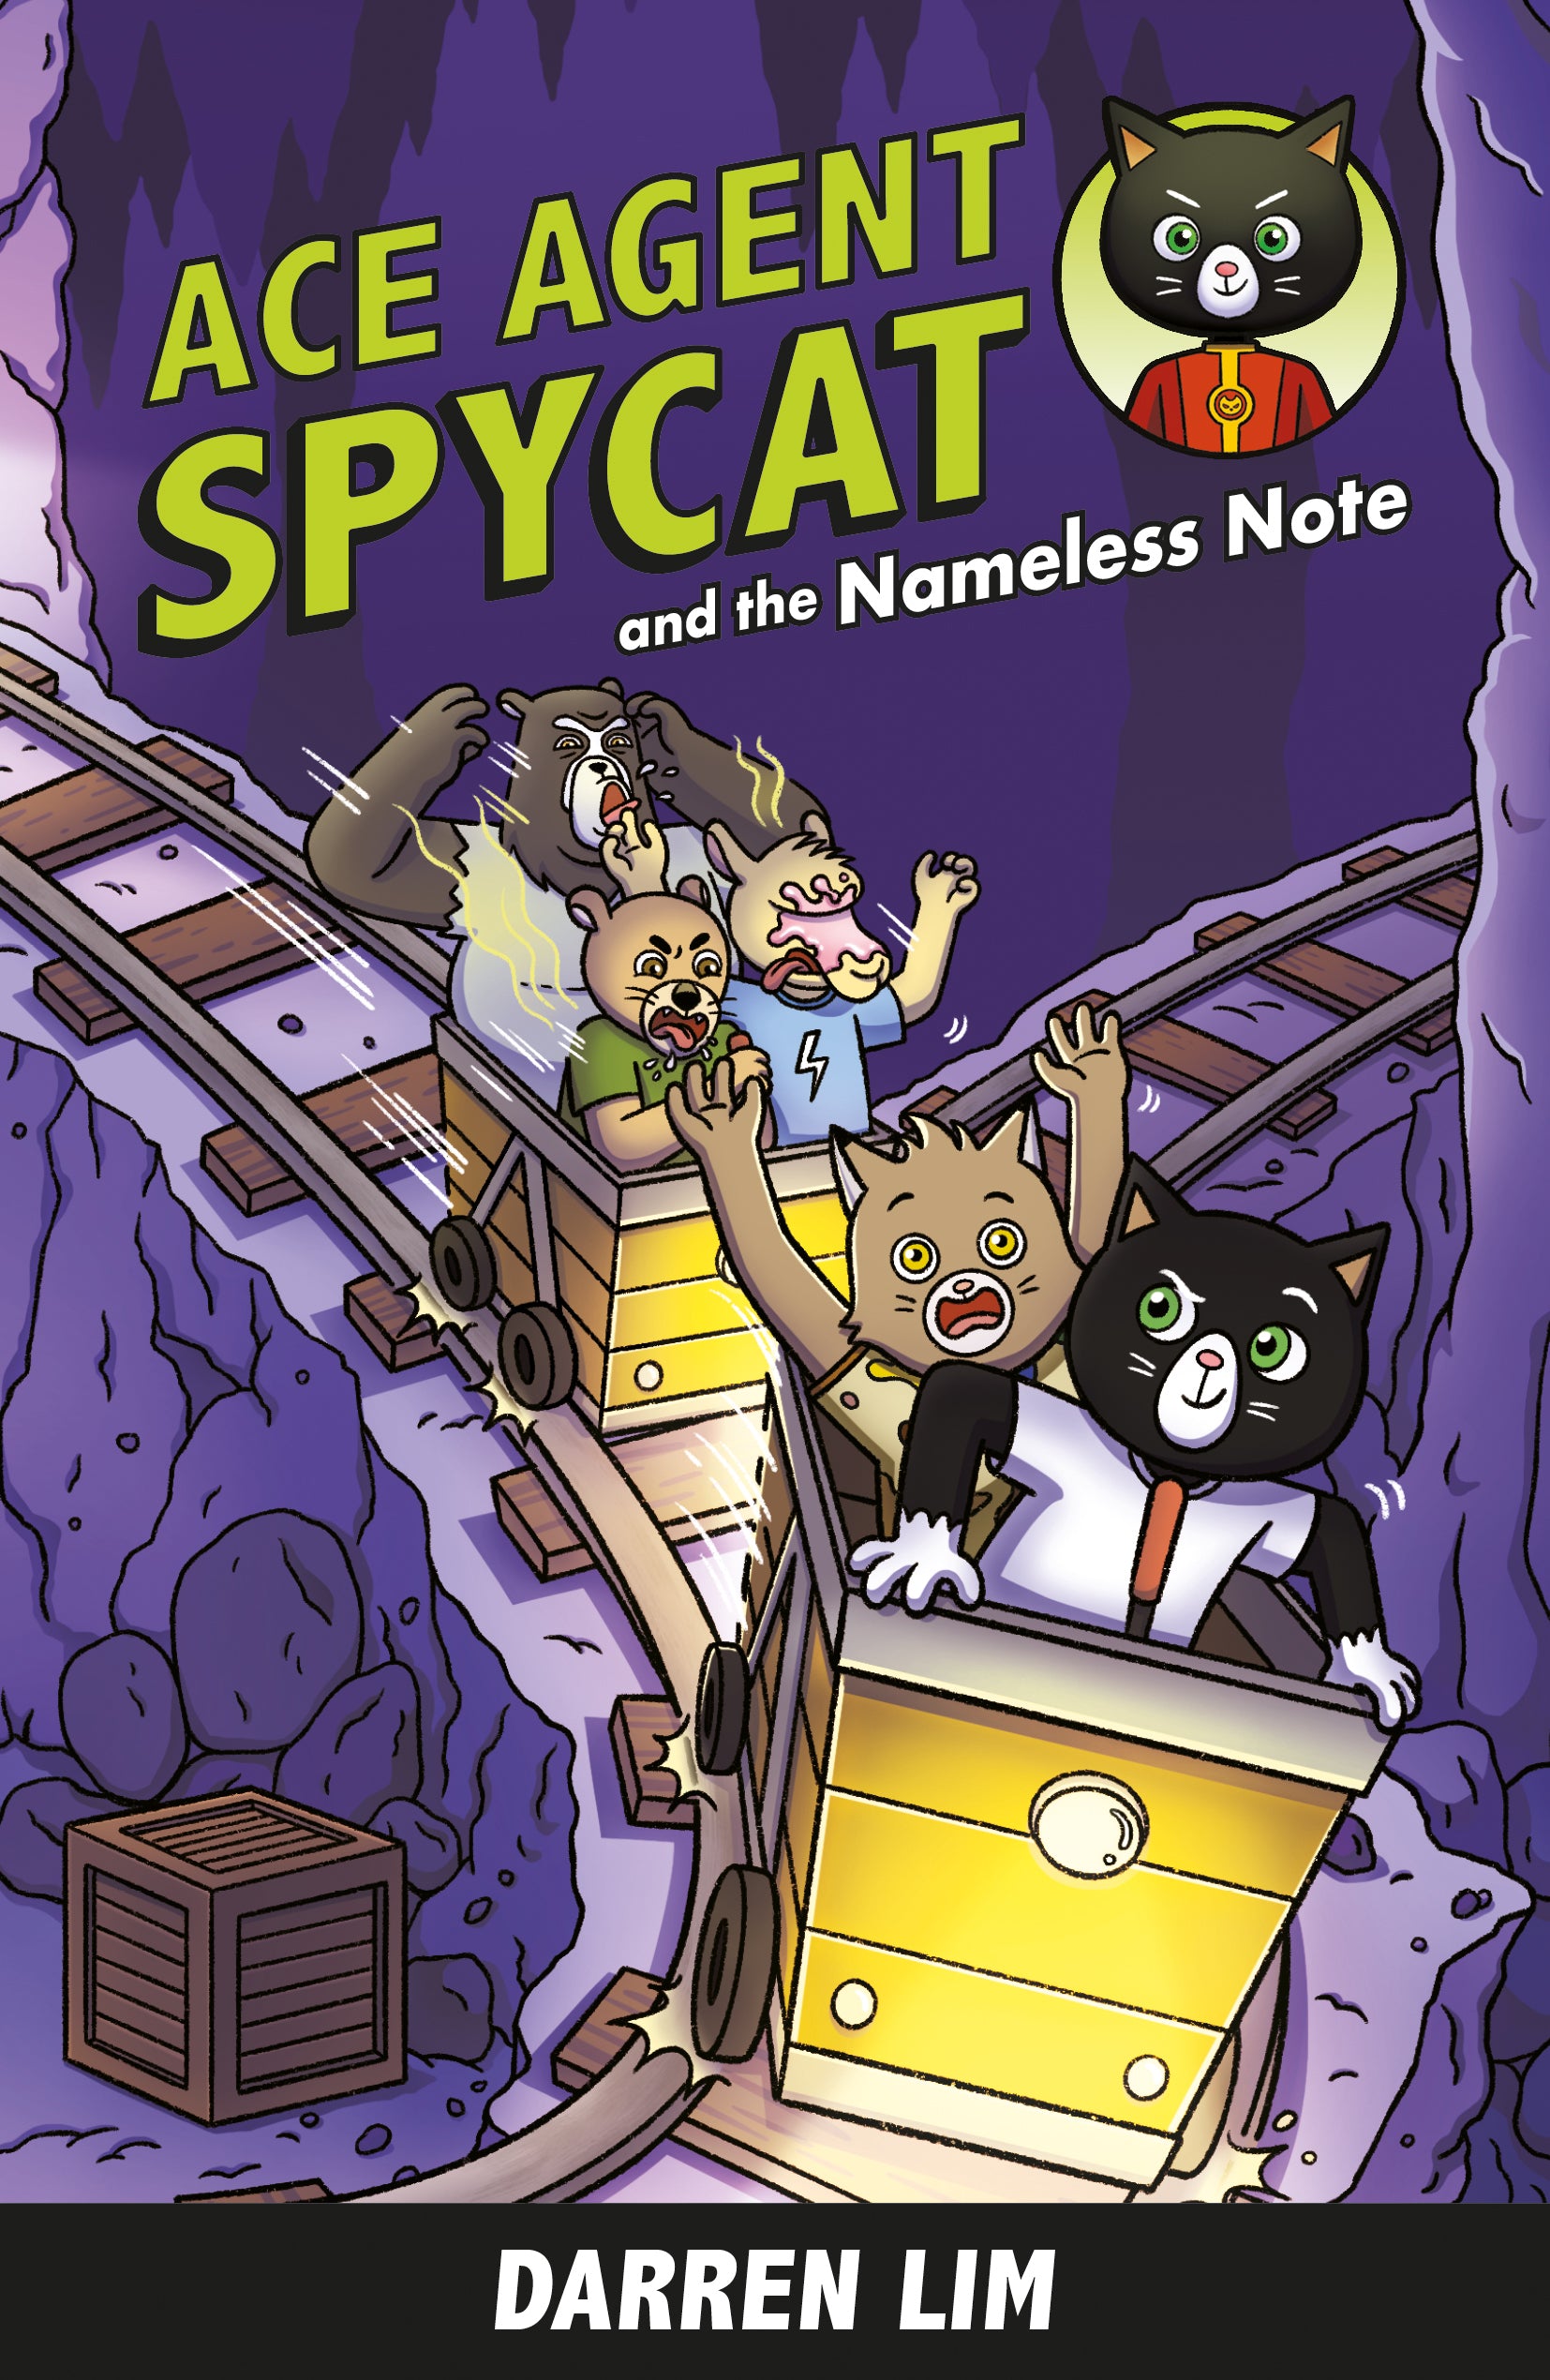 Ace Agent Spycat and the Nameless Note